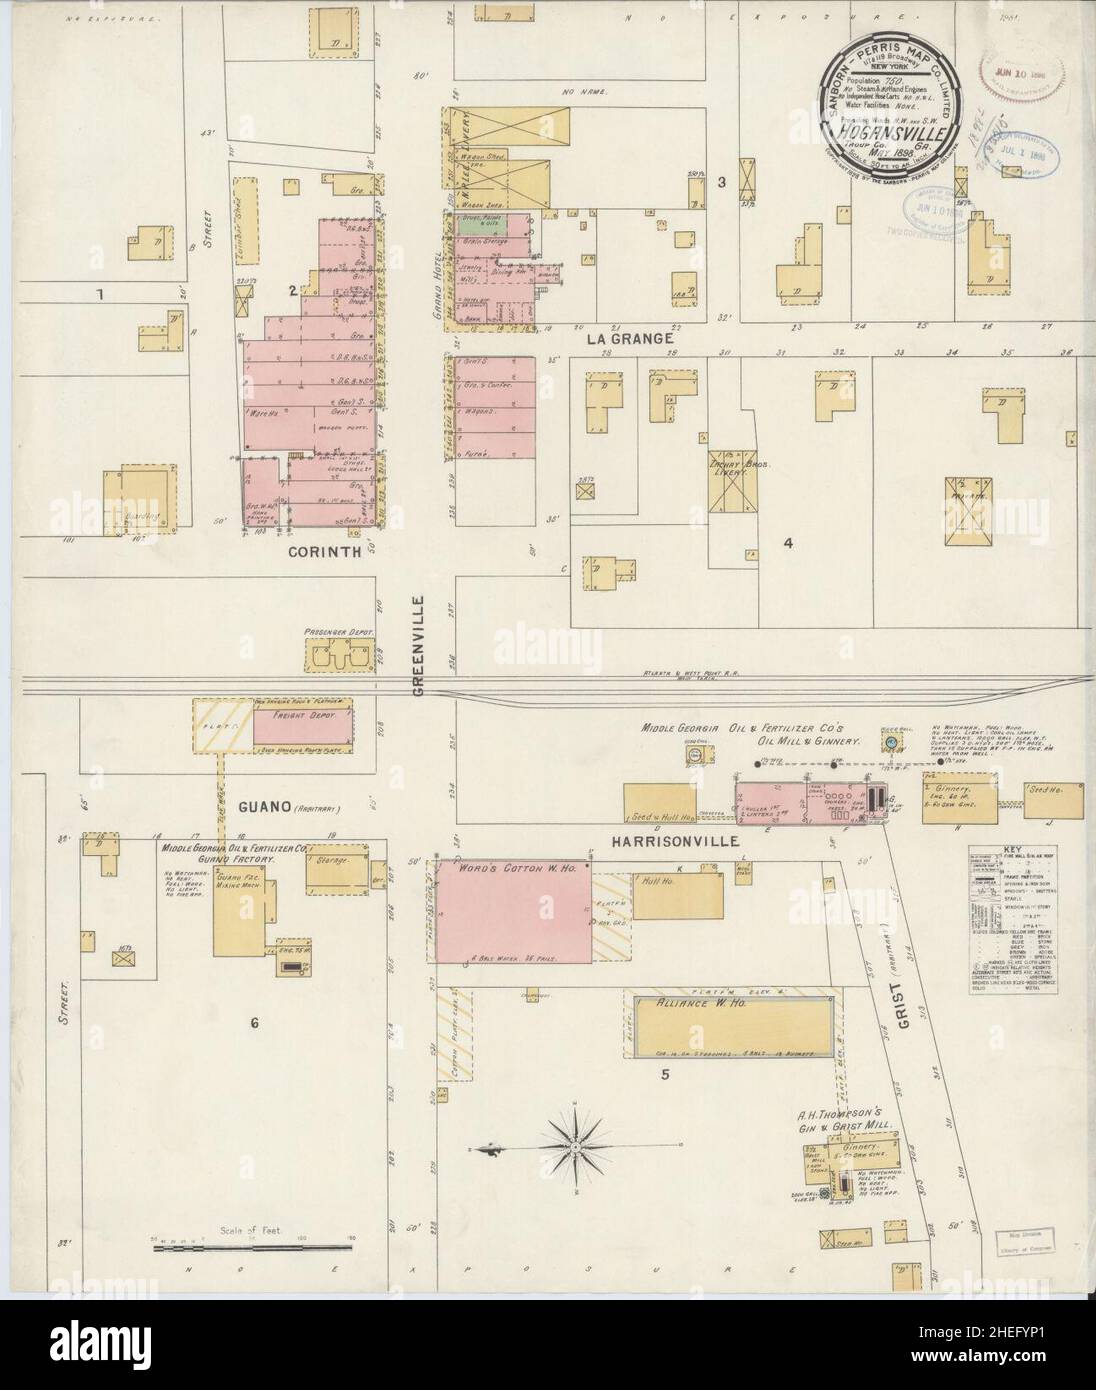 Sanborn Fire Insurance Map from Hogansville, Troup County, Georgia. Stock Photo